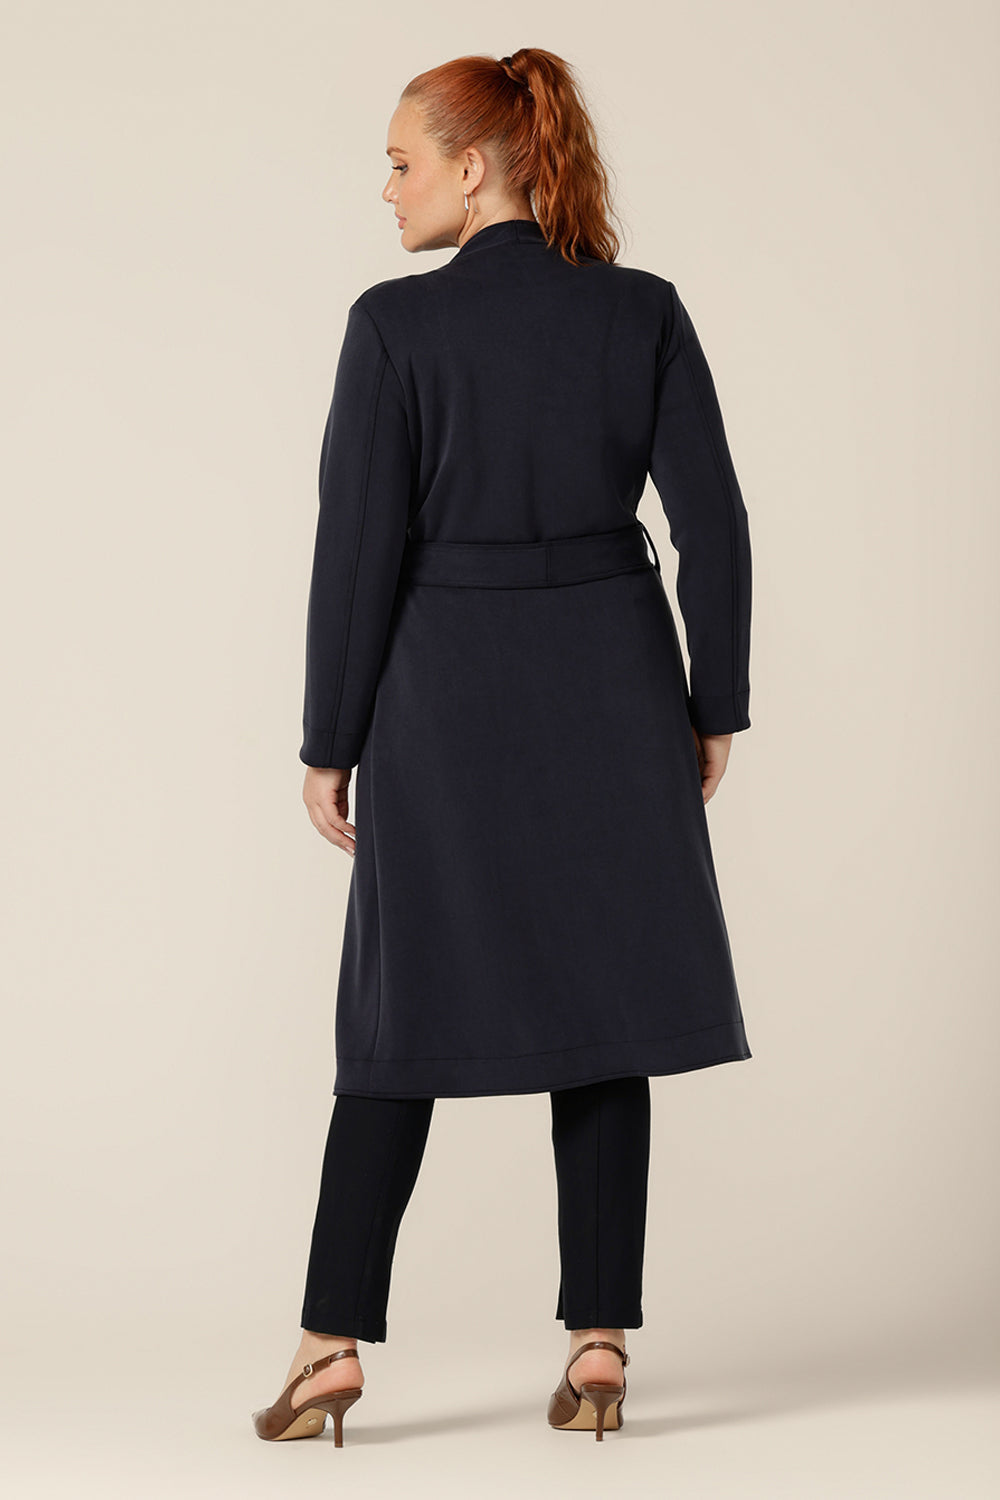 Back view of the best coat for Australia and New Zealand winters, the Marant Trenchcoat in Bluestone is made from winter-weight modal fabric for luxurious comfort. A collarless, open fronted coat with tie belt and patch pockets, this classic women's jacket makes for an elegant yet warm transeasonal navy coat.